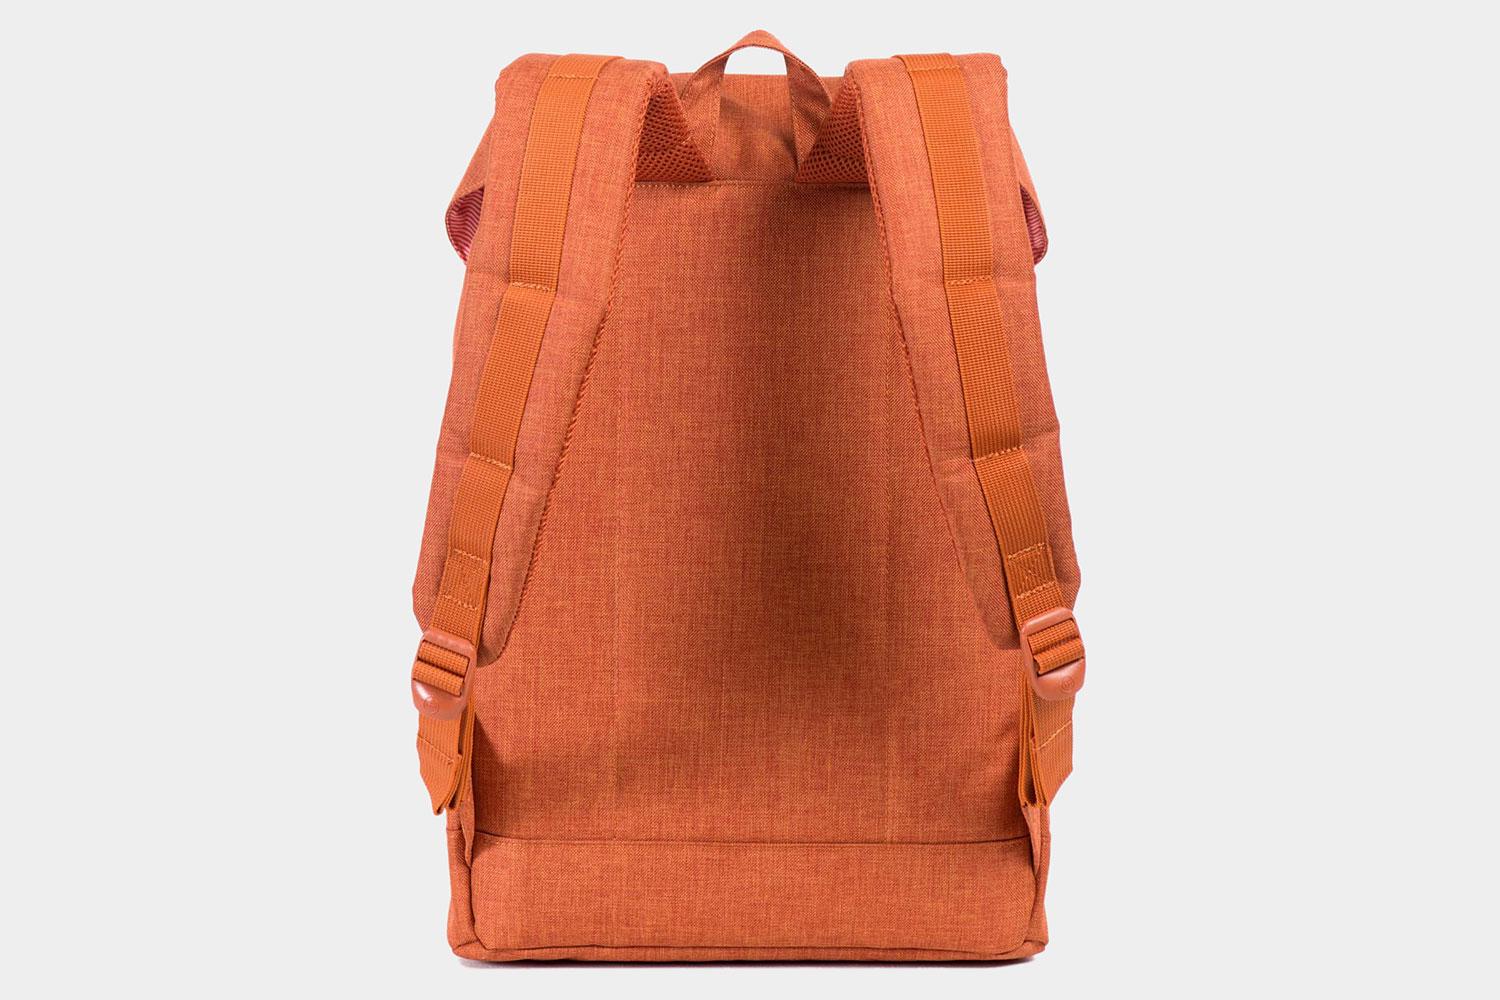 Rear view of a Herschel Supply Co Retreat backpack.